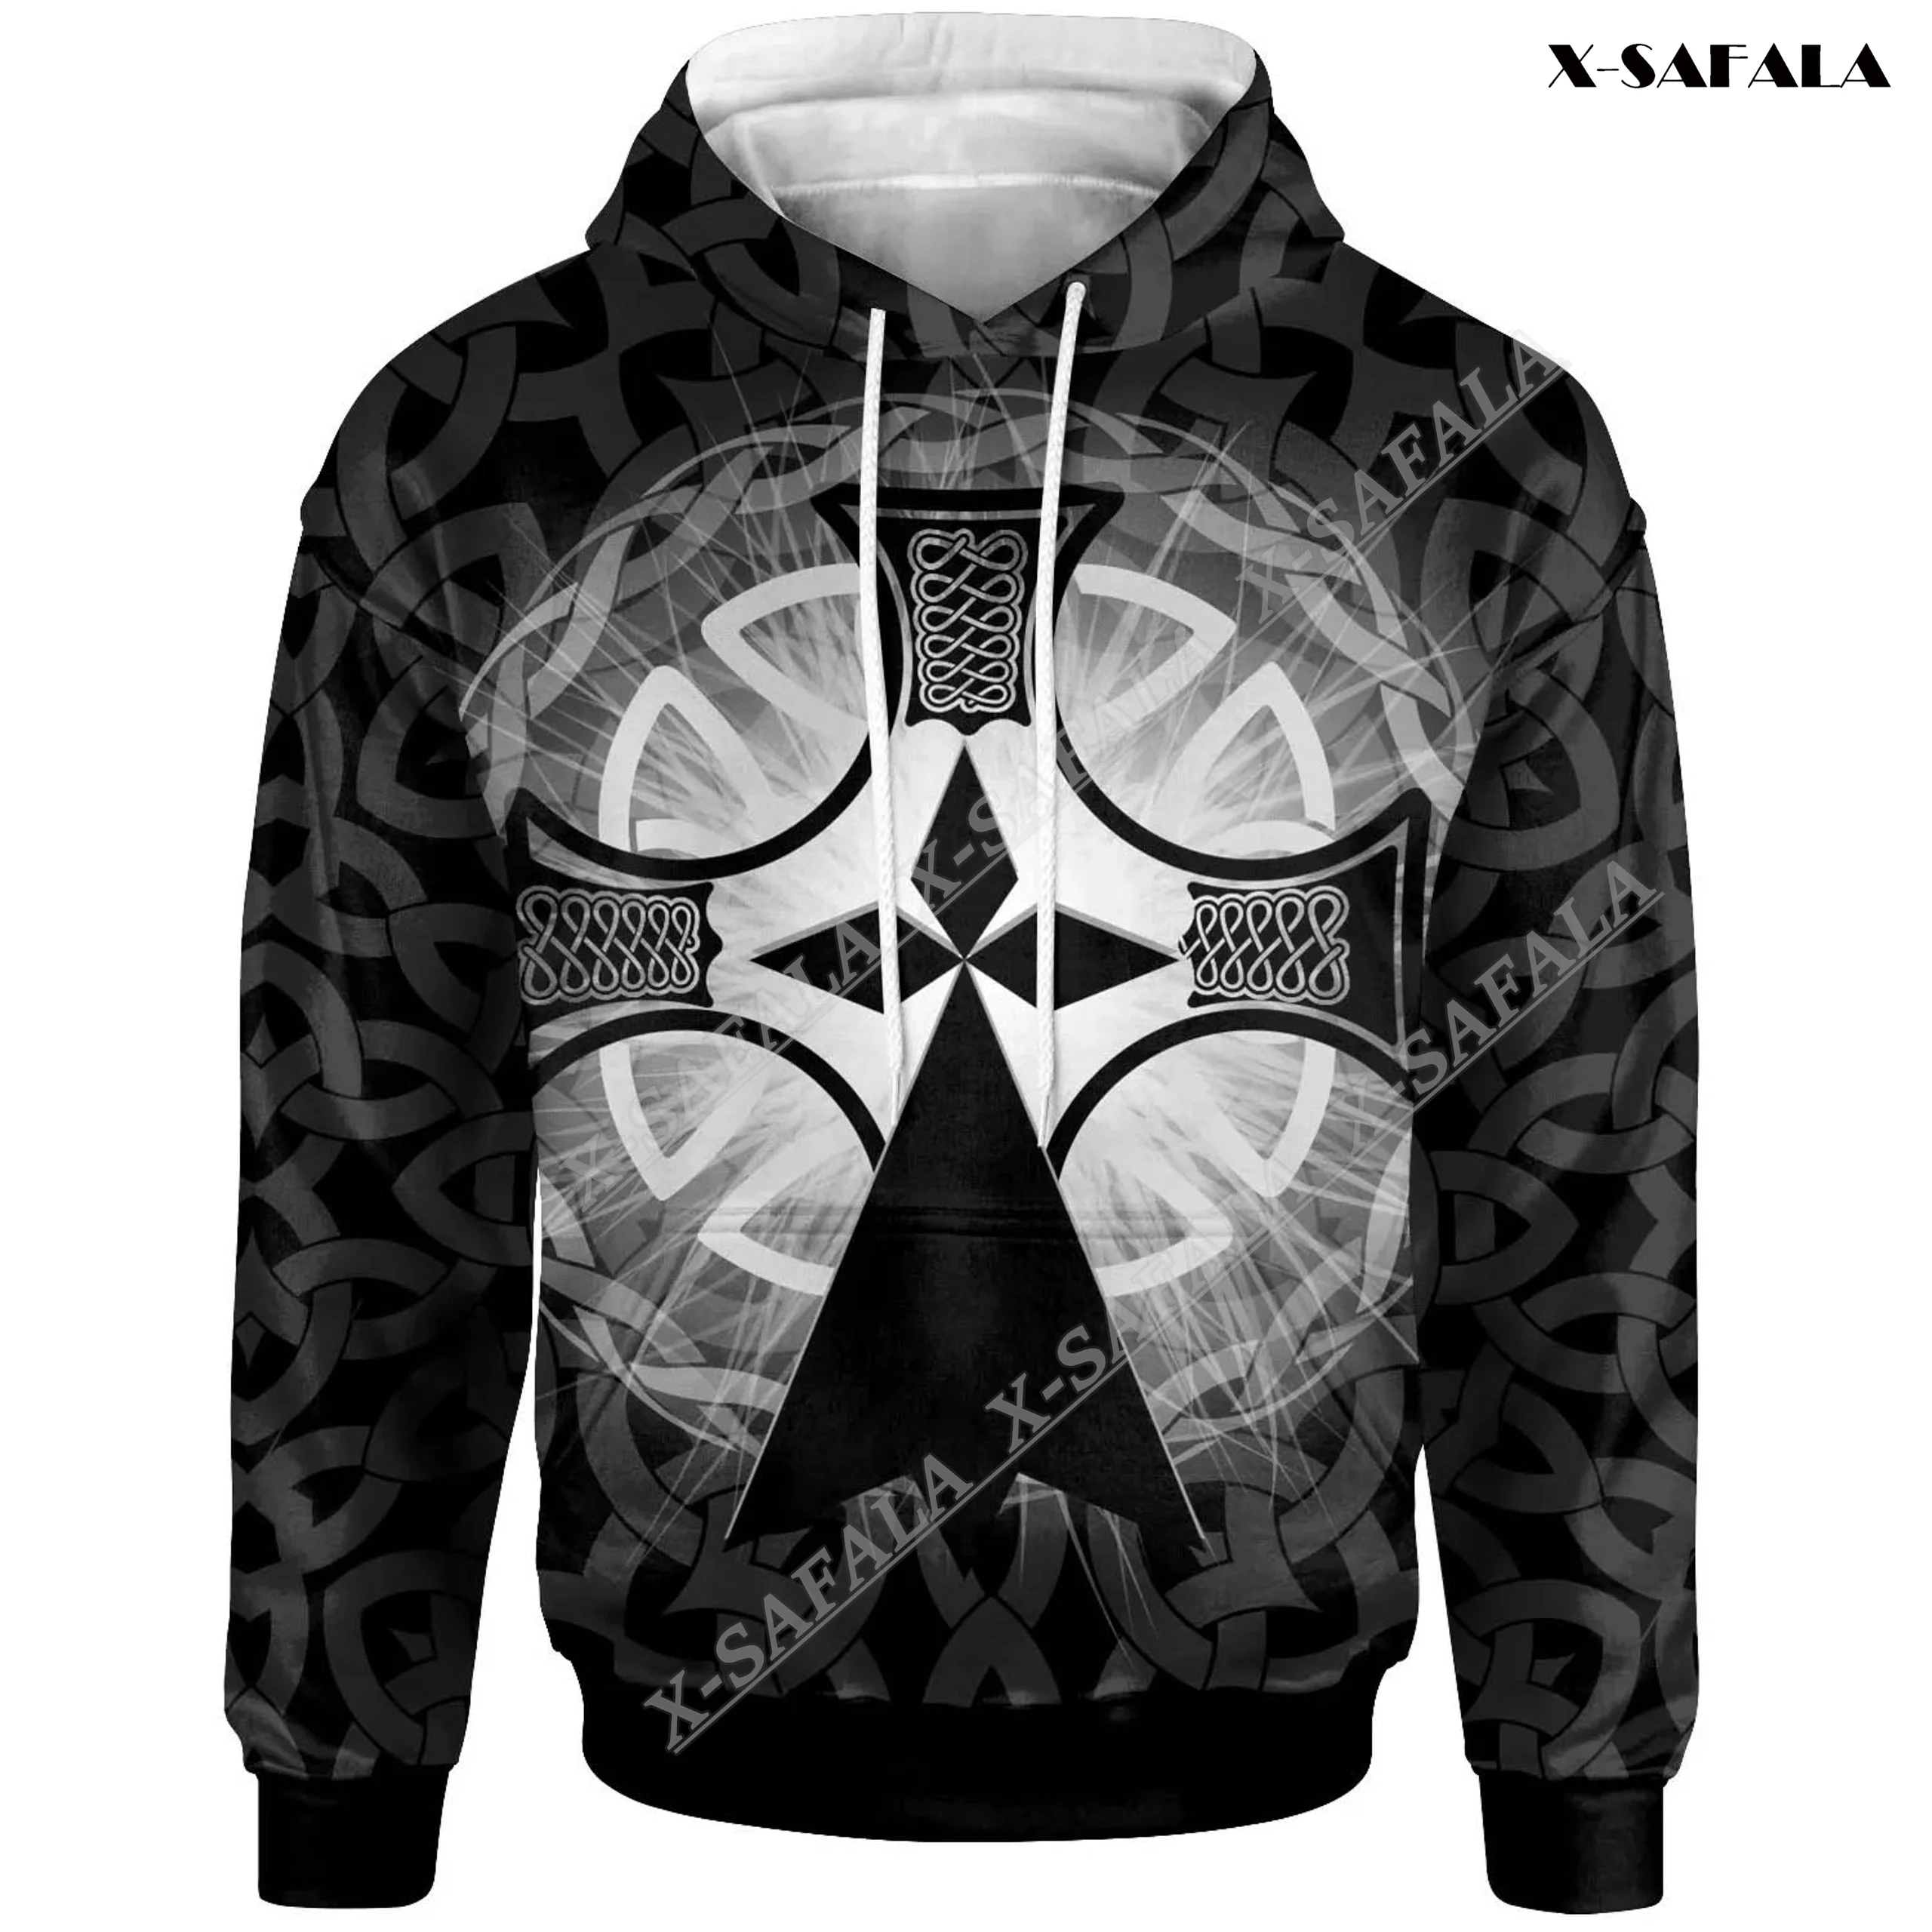 

France BRITTANY ERMINE CELTIC Rugby Compass 3D Printed Hoodie Man Tattoo Zipper Pullover Sweatshirt Jersey Tops Tracksuits